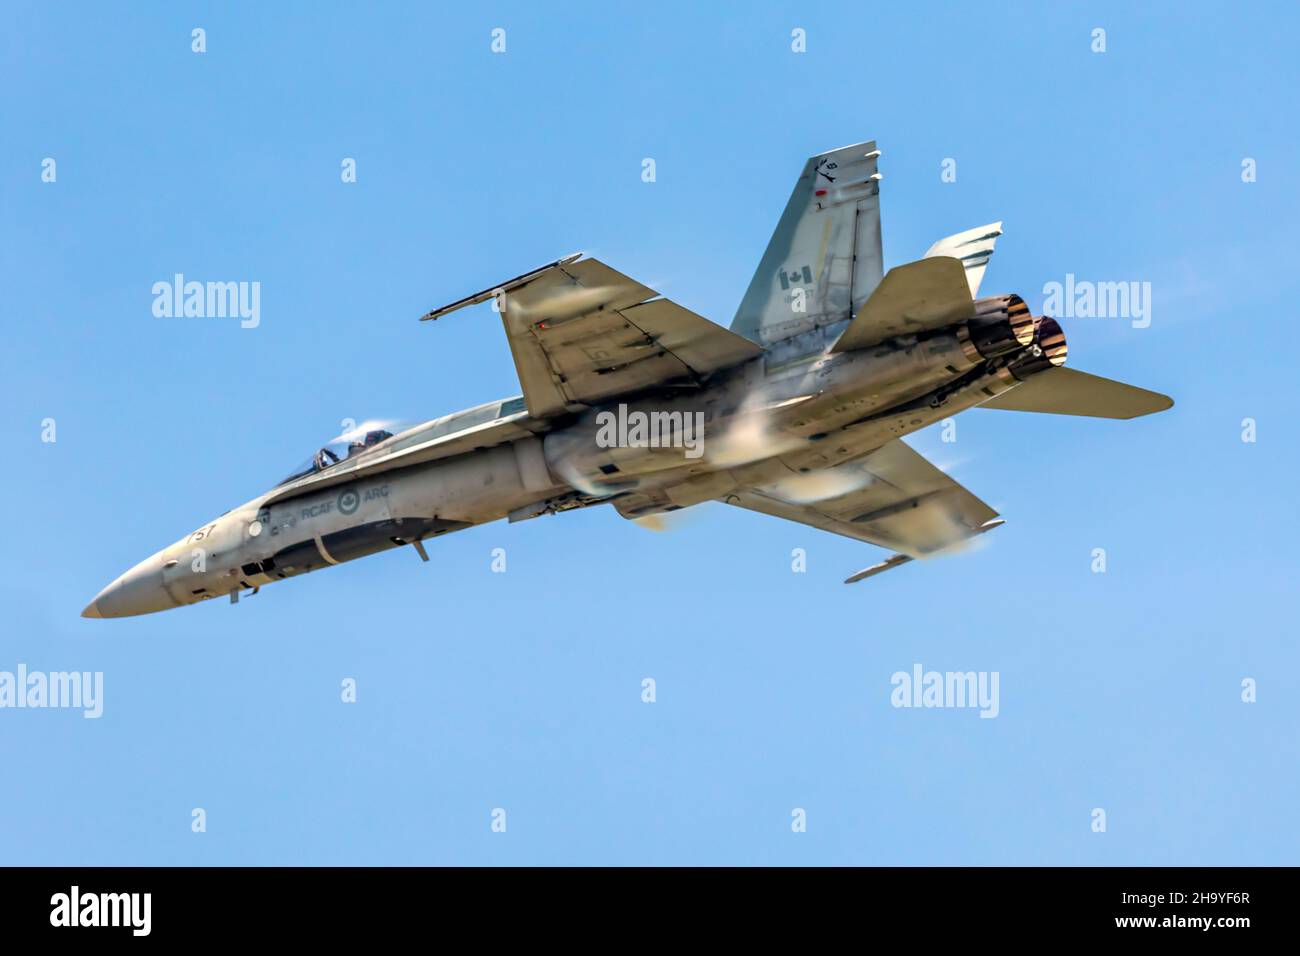 A Royal Canadian Air Force CF-18 Hornet demonstration during a performance at Airshow London SkyDrive held in London, Ontario, Canada. Stock Photo